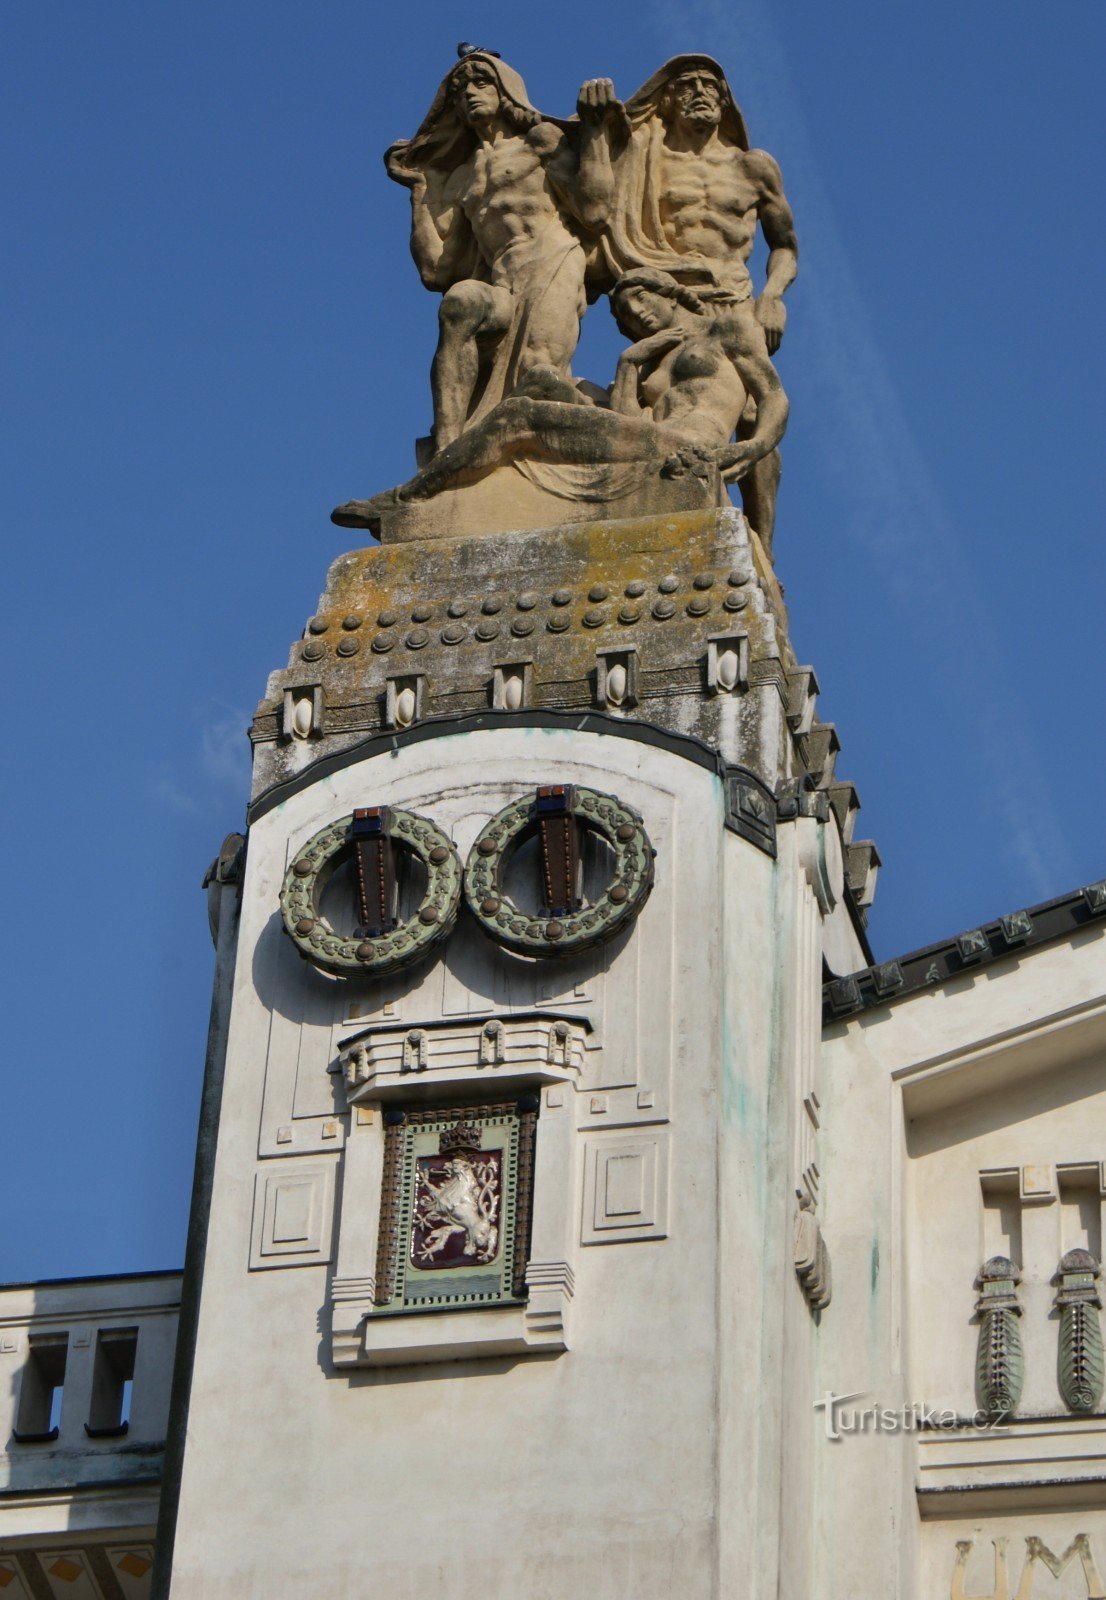 Šturs' Awakening of the Nation and the Czech Lion